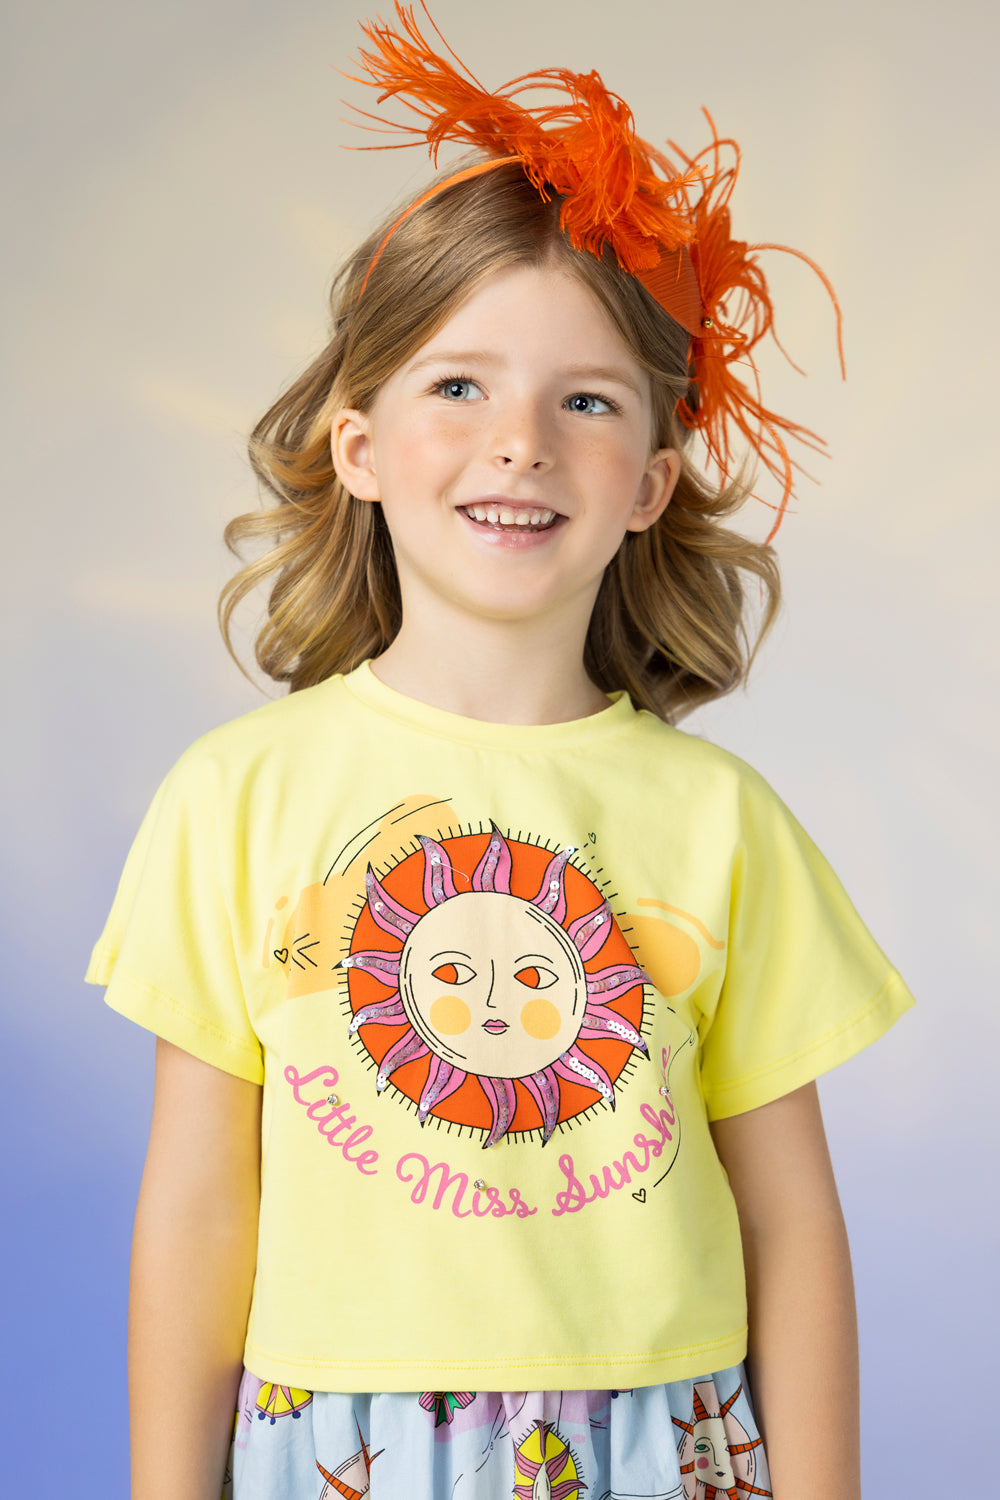 Pale yellow "Little Miss Sunshine" hand-embellished with Swarovski crystals t-shirt